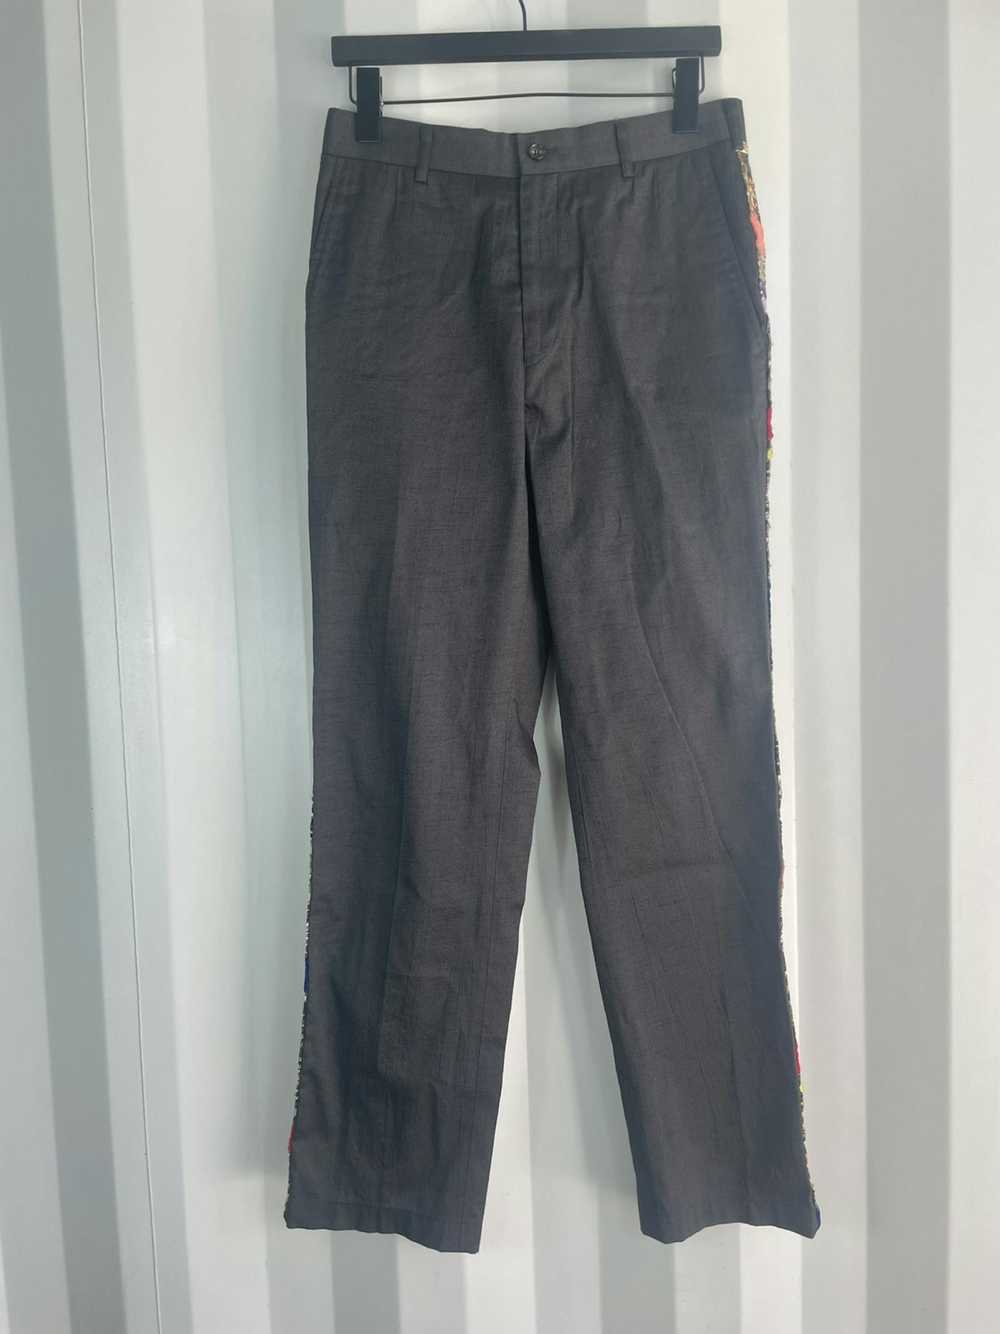 Comme des Garcons Homme Tapestry Trousers - image 4